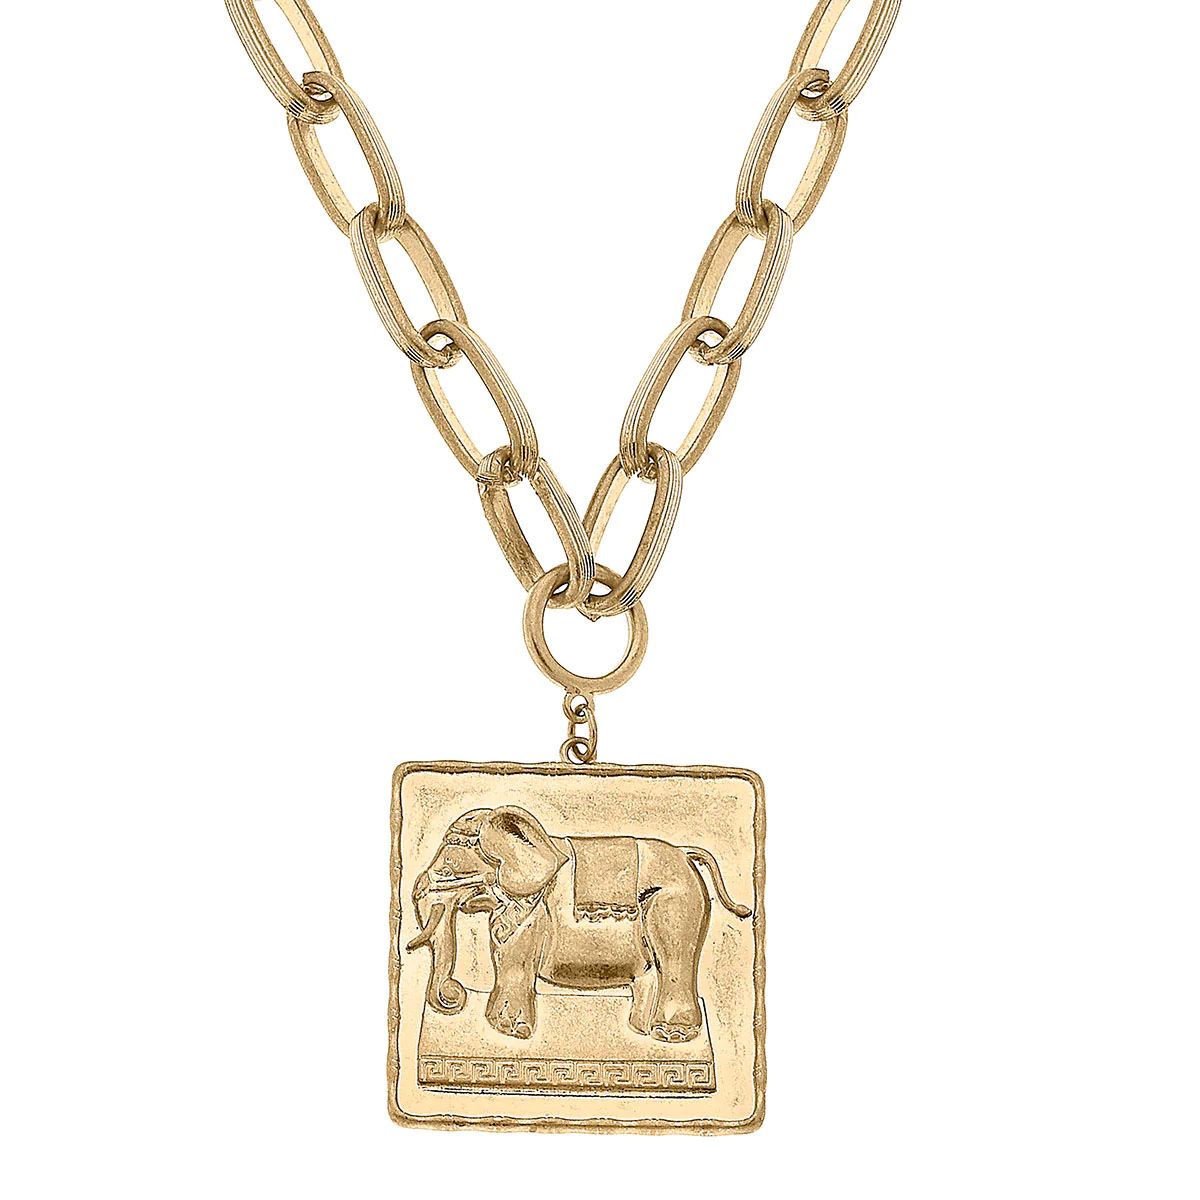 Bracy Elephant Pendant Necklace in Worn Gold | CANVAS